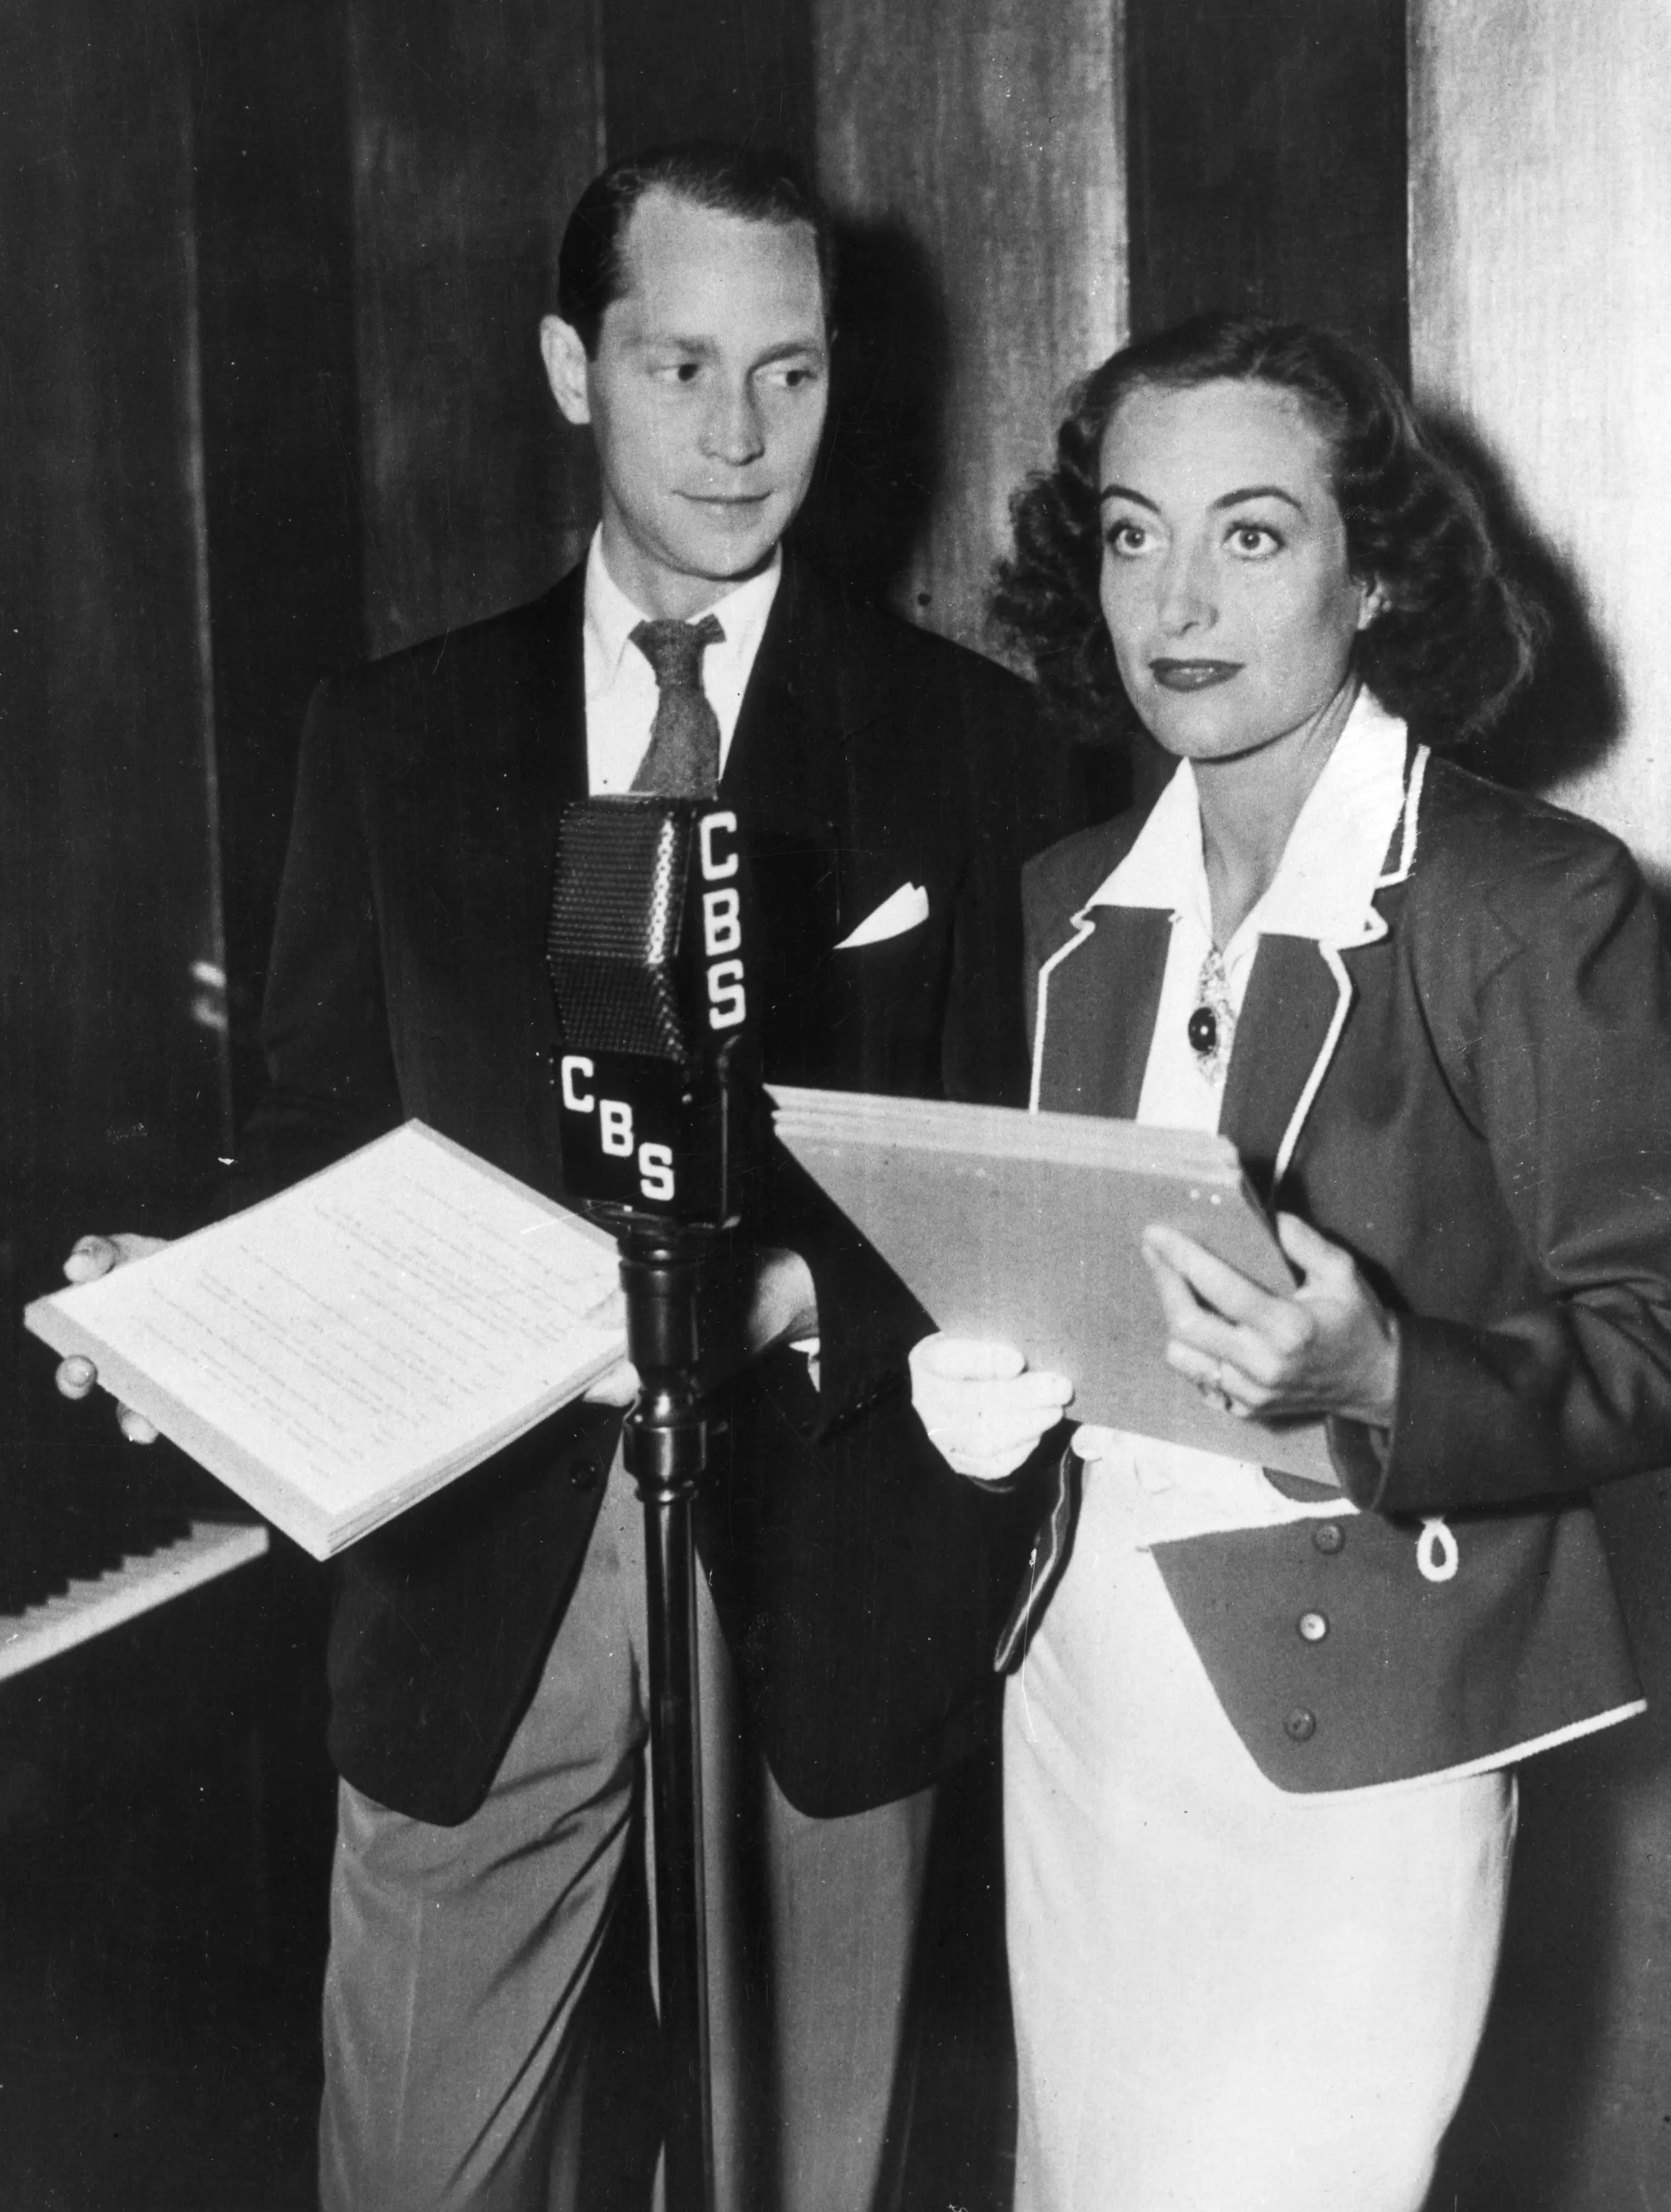 Joan Crawford and her second husband Franchot Tone recording a radio show for CBS.